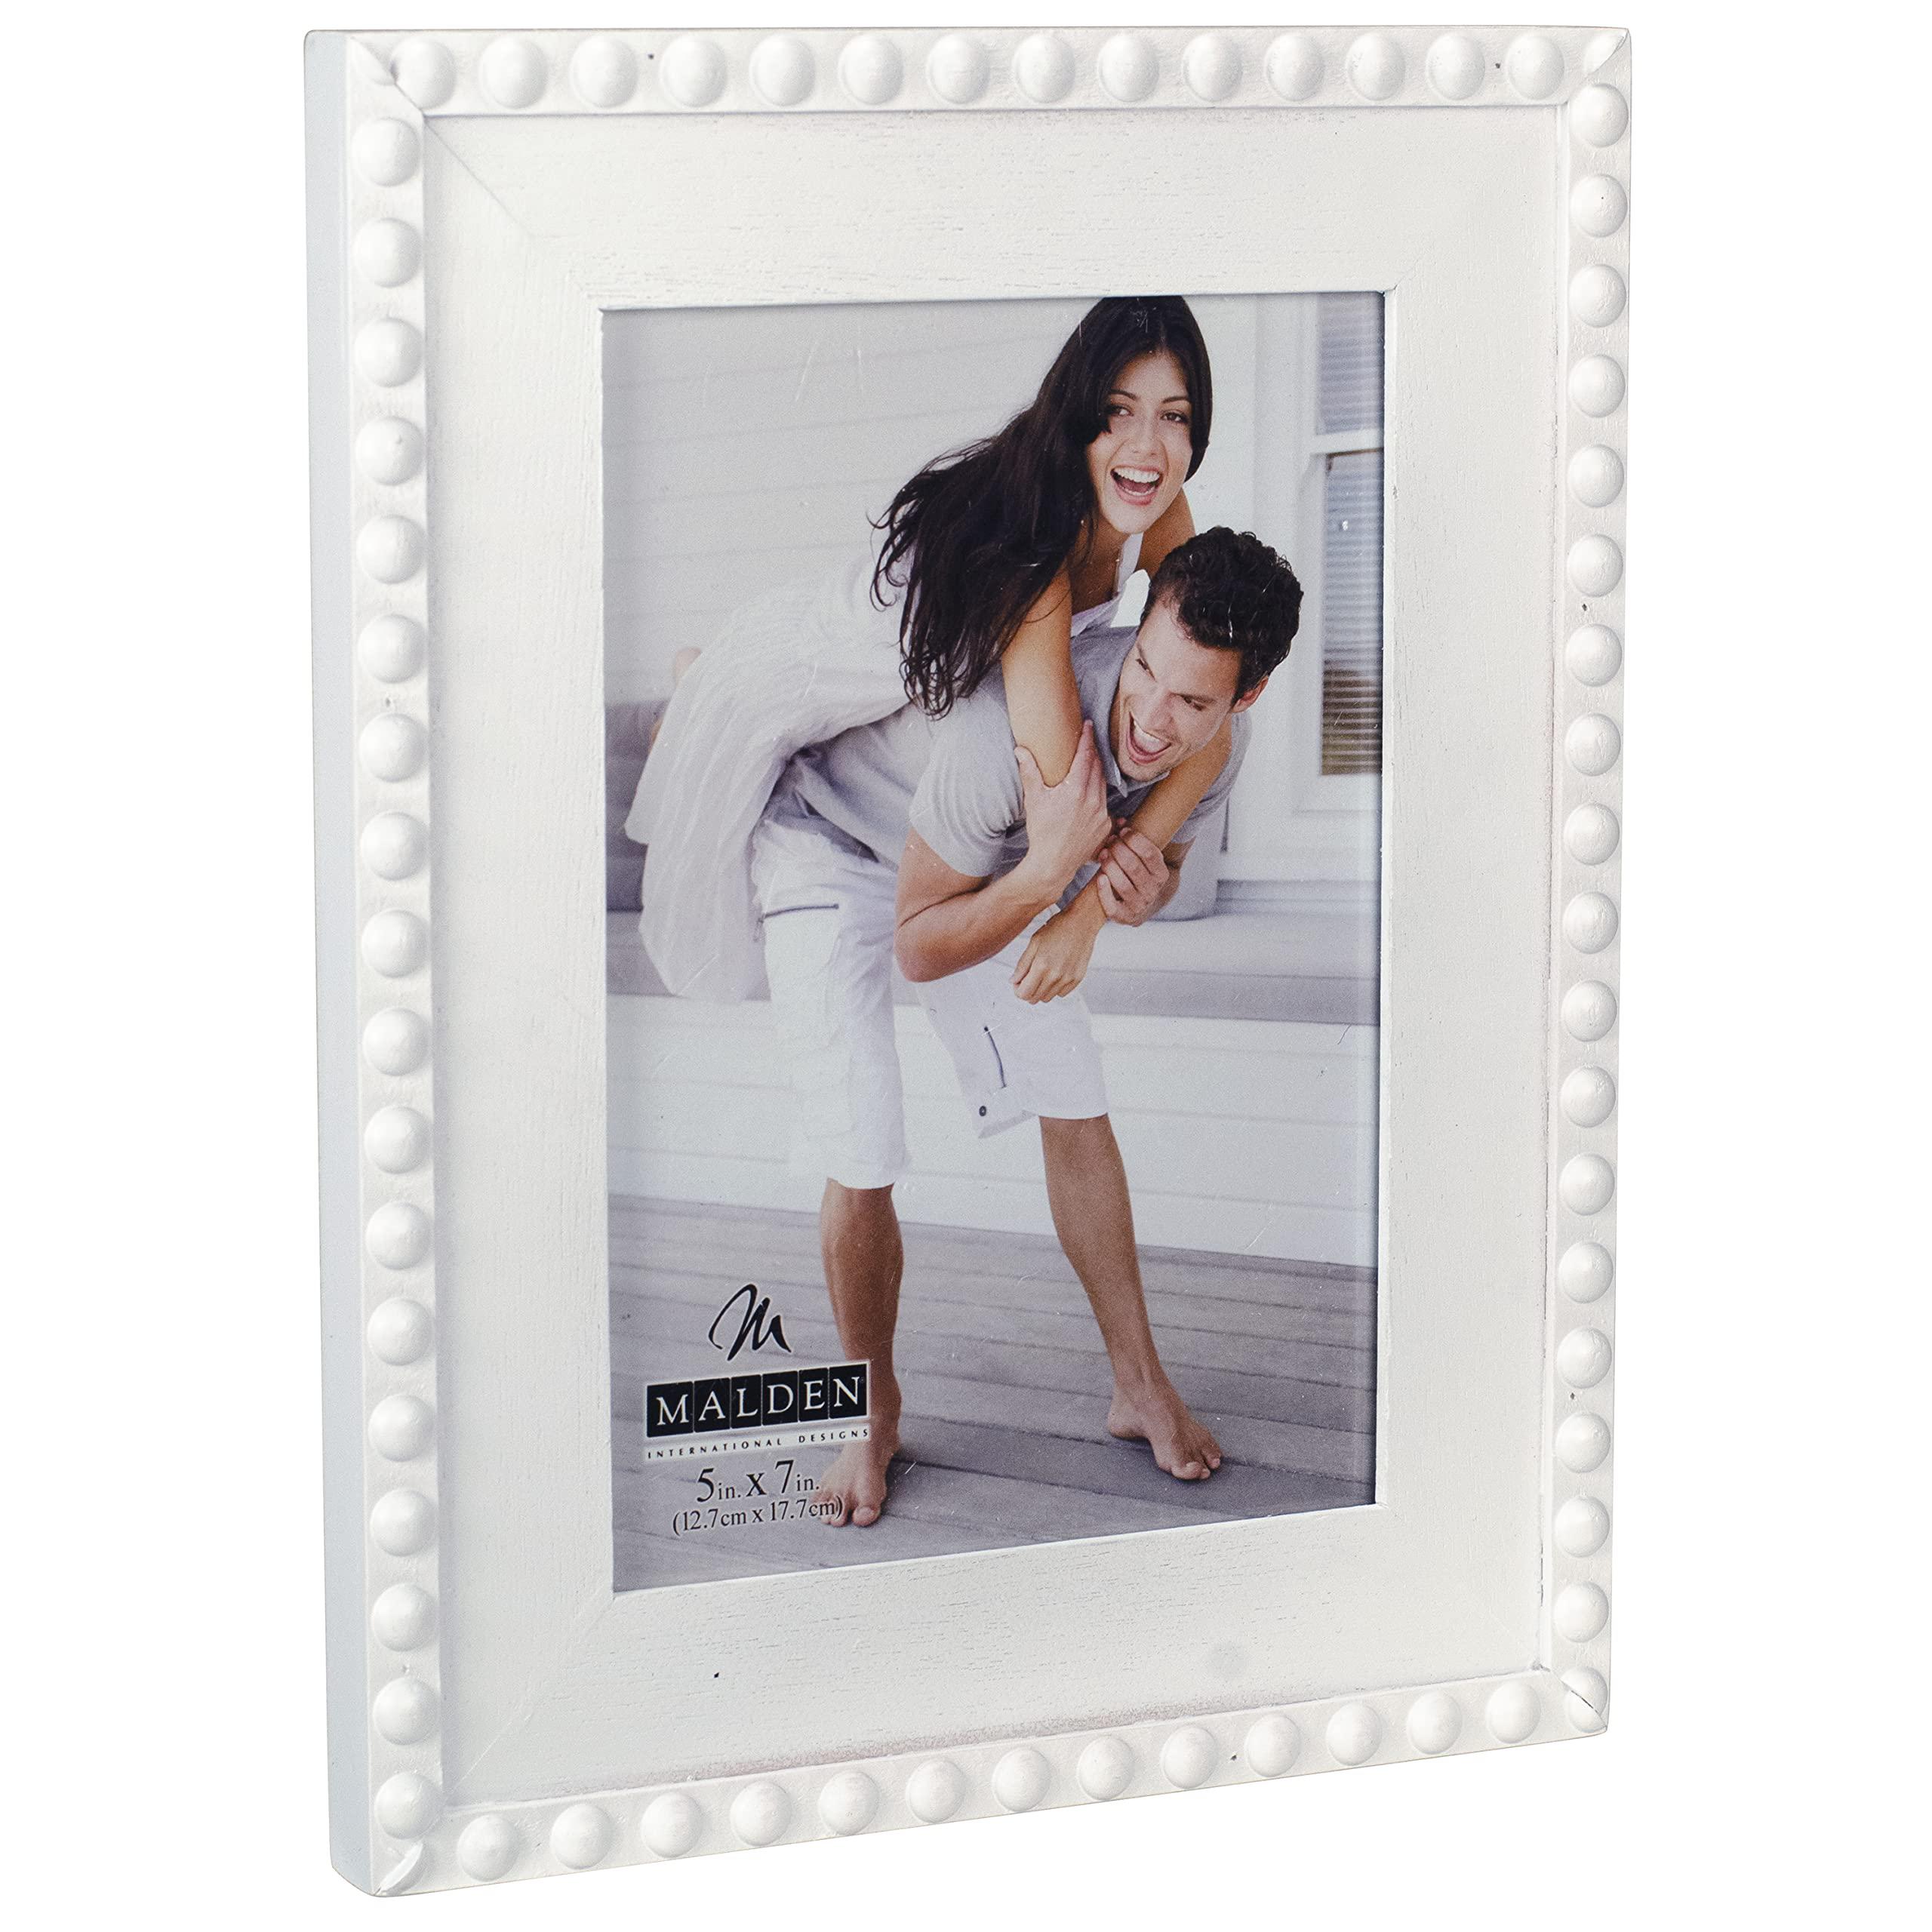 malden international designs 5x7 white bead with wood mat picture frame mdf wood standard photo frame, white (2388-57)